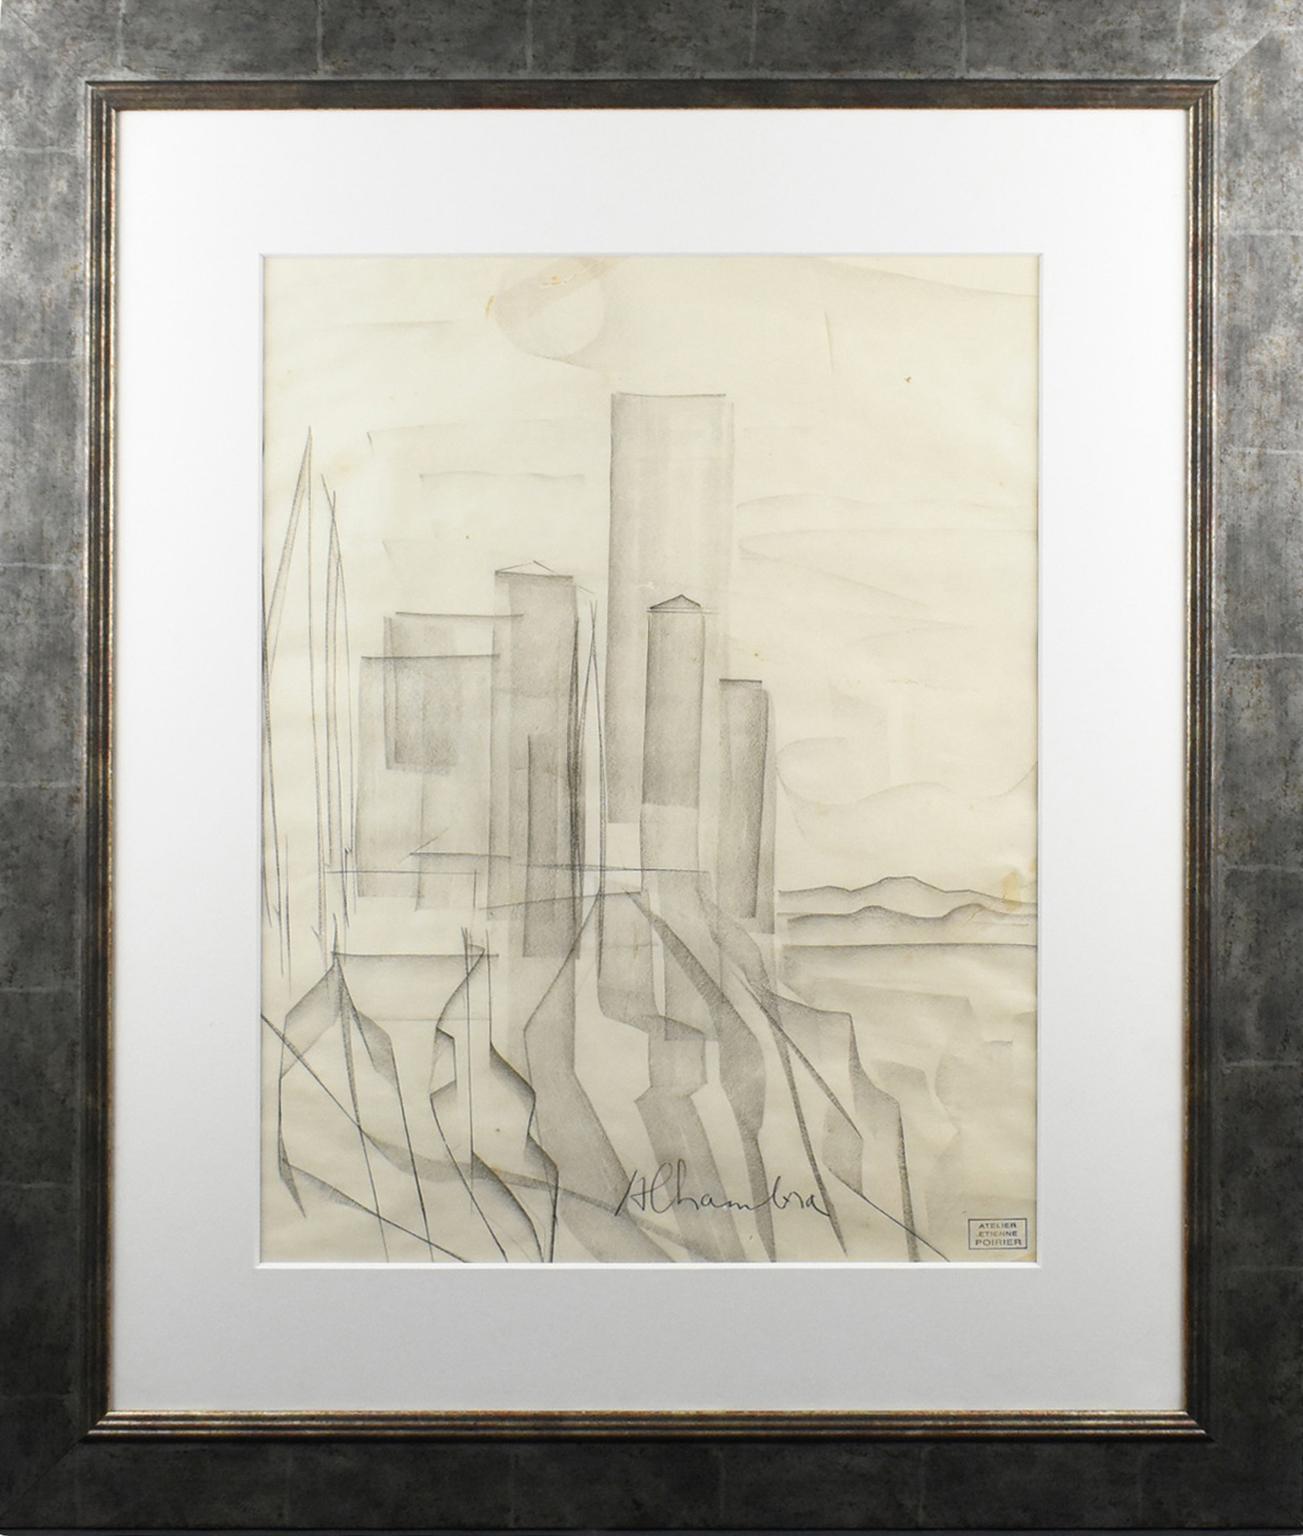 A stunning charcoal drawing by French artist Etienne Poirier (1919 - 2002). This work is a charcoal-on-paper composition depicting an interpretation of the famous Alhambra Palace in Granada, Spain. This minimalist composition boasts only a few lines